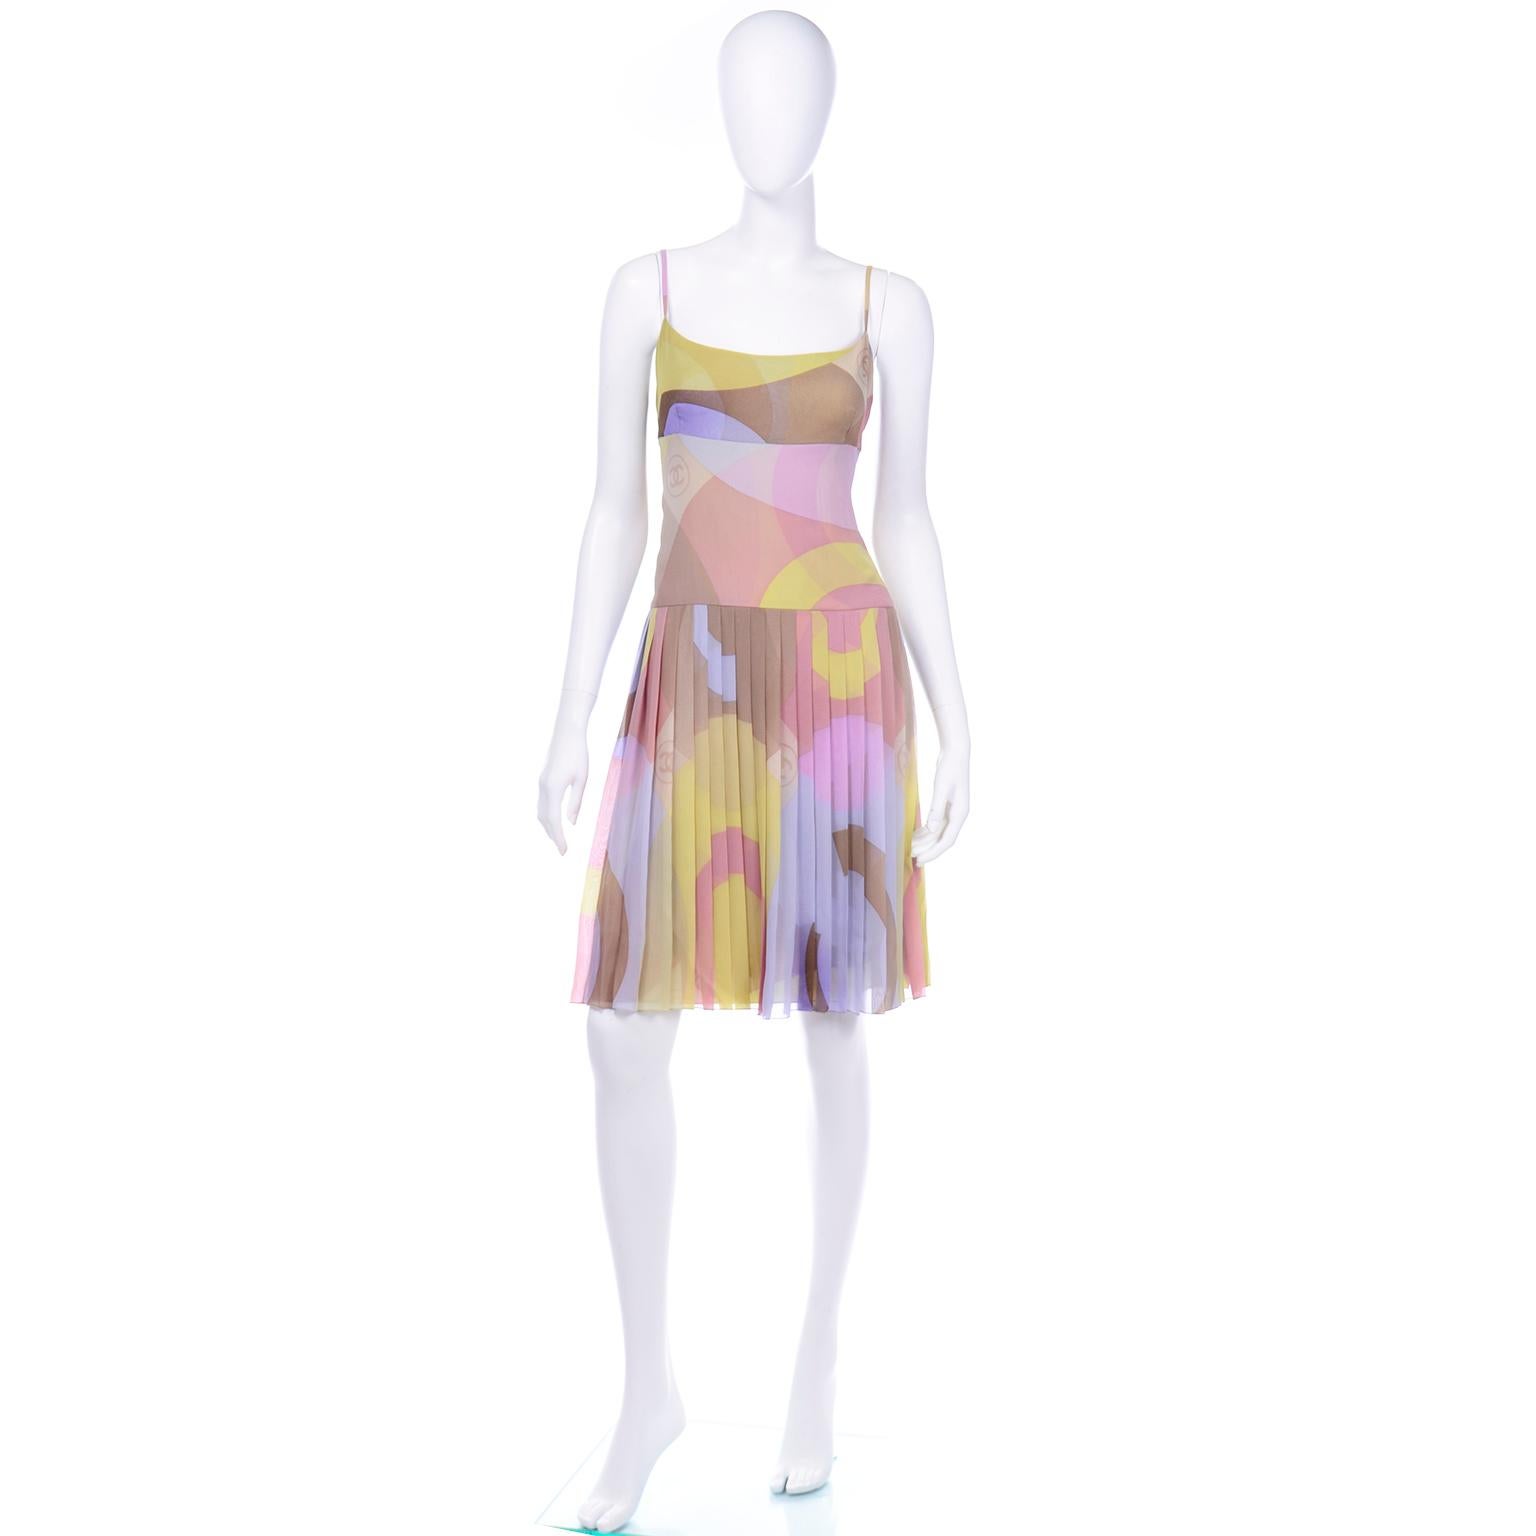 We think this is the perfect Spring Summer dress! This Chanel 2001 Cruise collection dress is in a beautiful silk abstract logo print in soft muted shades of lime green, light brown, lavender, periwinkle, tan, mauve, pink, and yellow. The Chanel